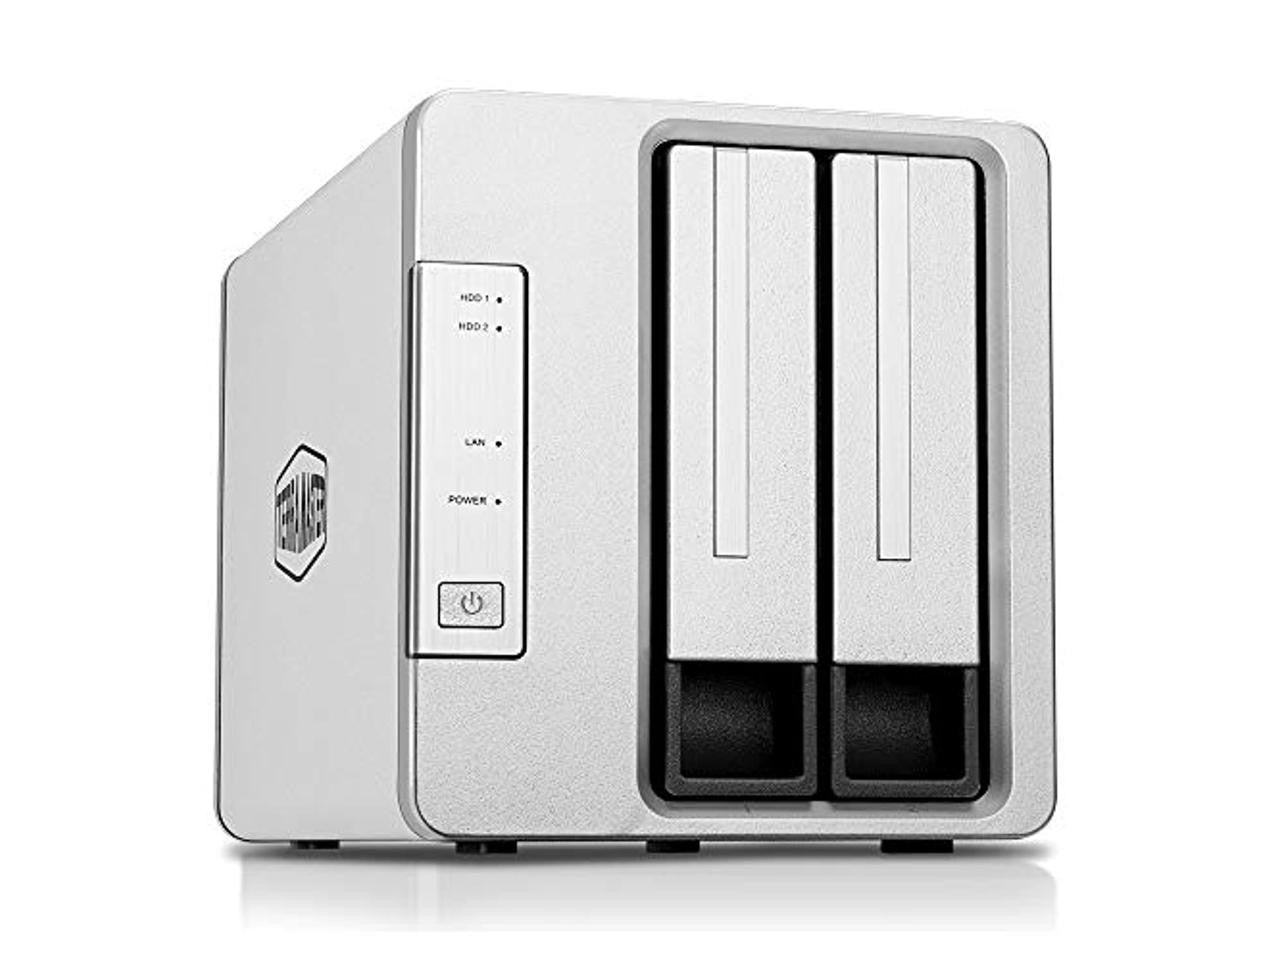 TerraMaster F2-210 2-Bay Home NAS with 6TB (2 x 4TB) of Western Digital Red Plus Drives Fully Assembled and Tested